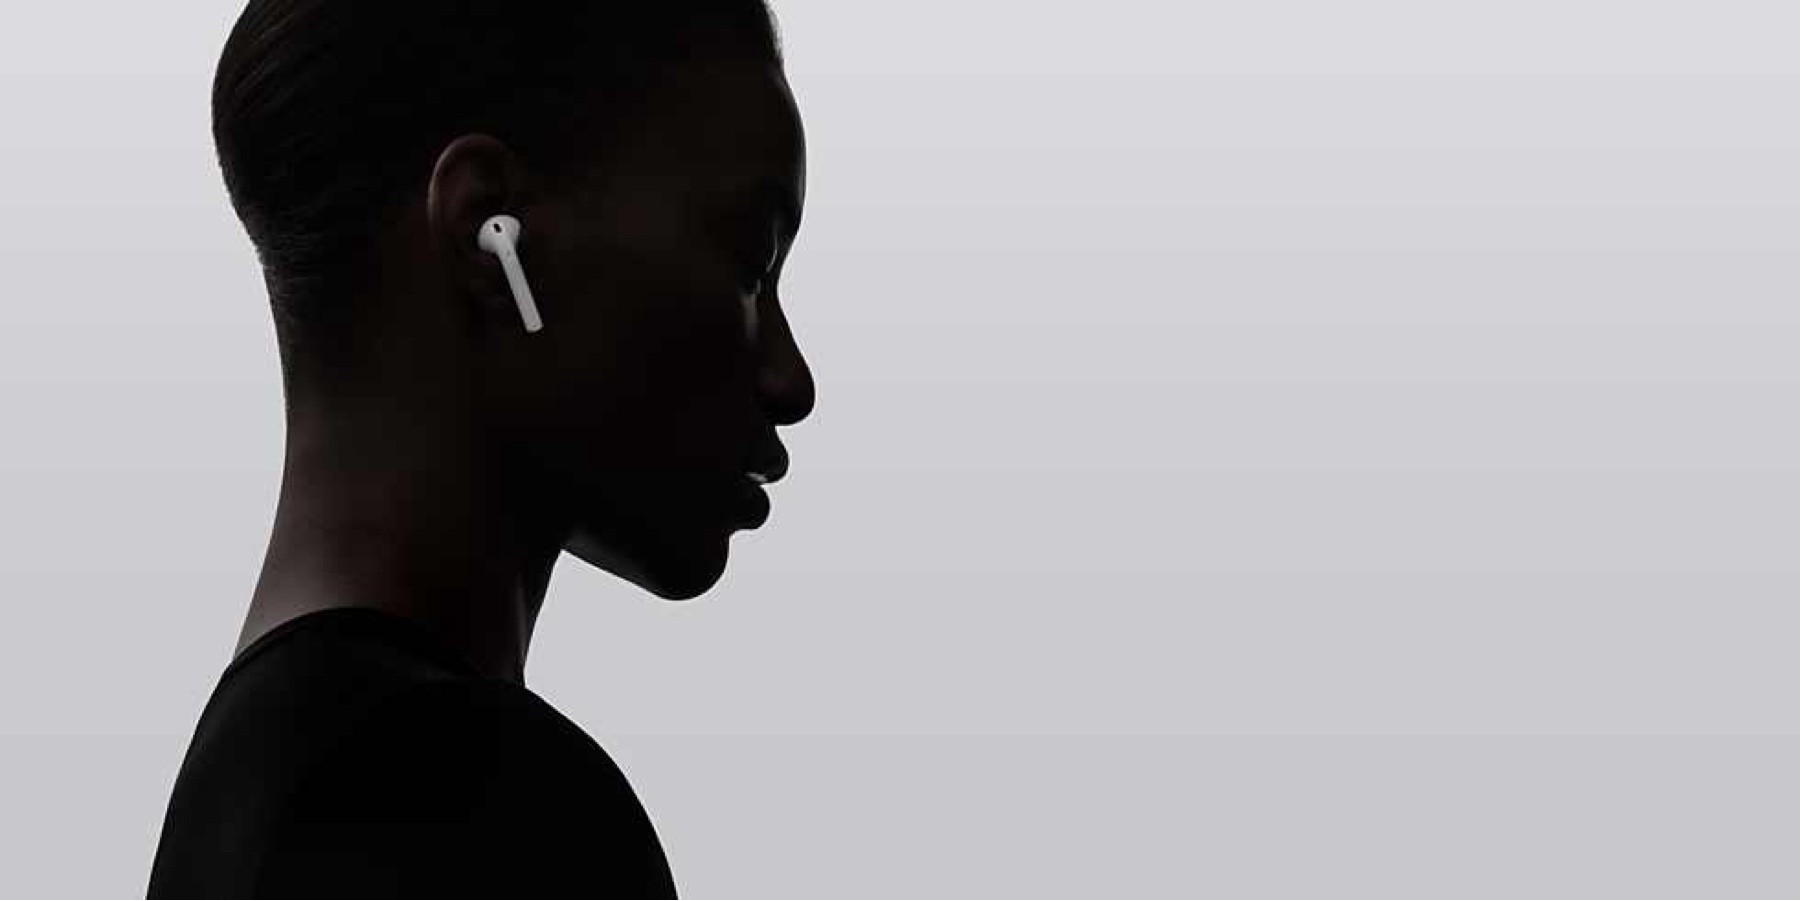 AirPods and going beyond the iPhone